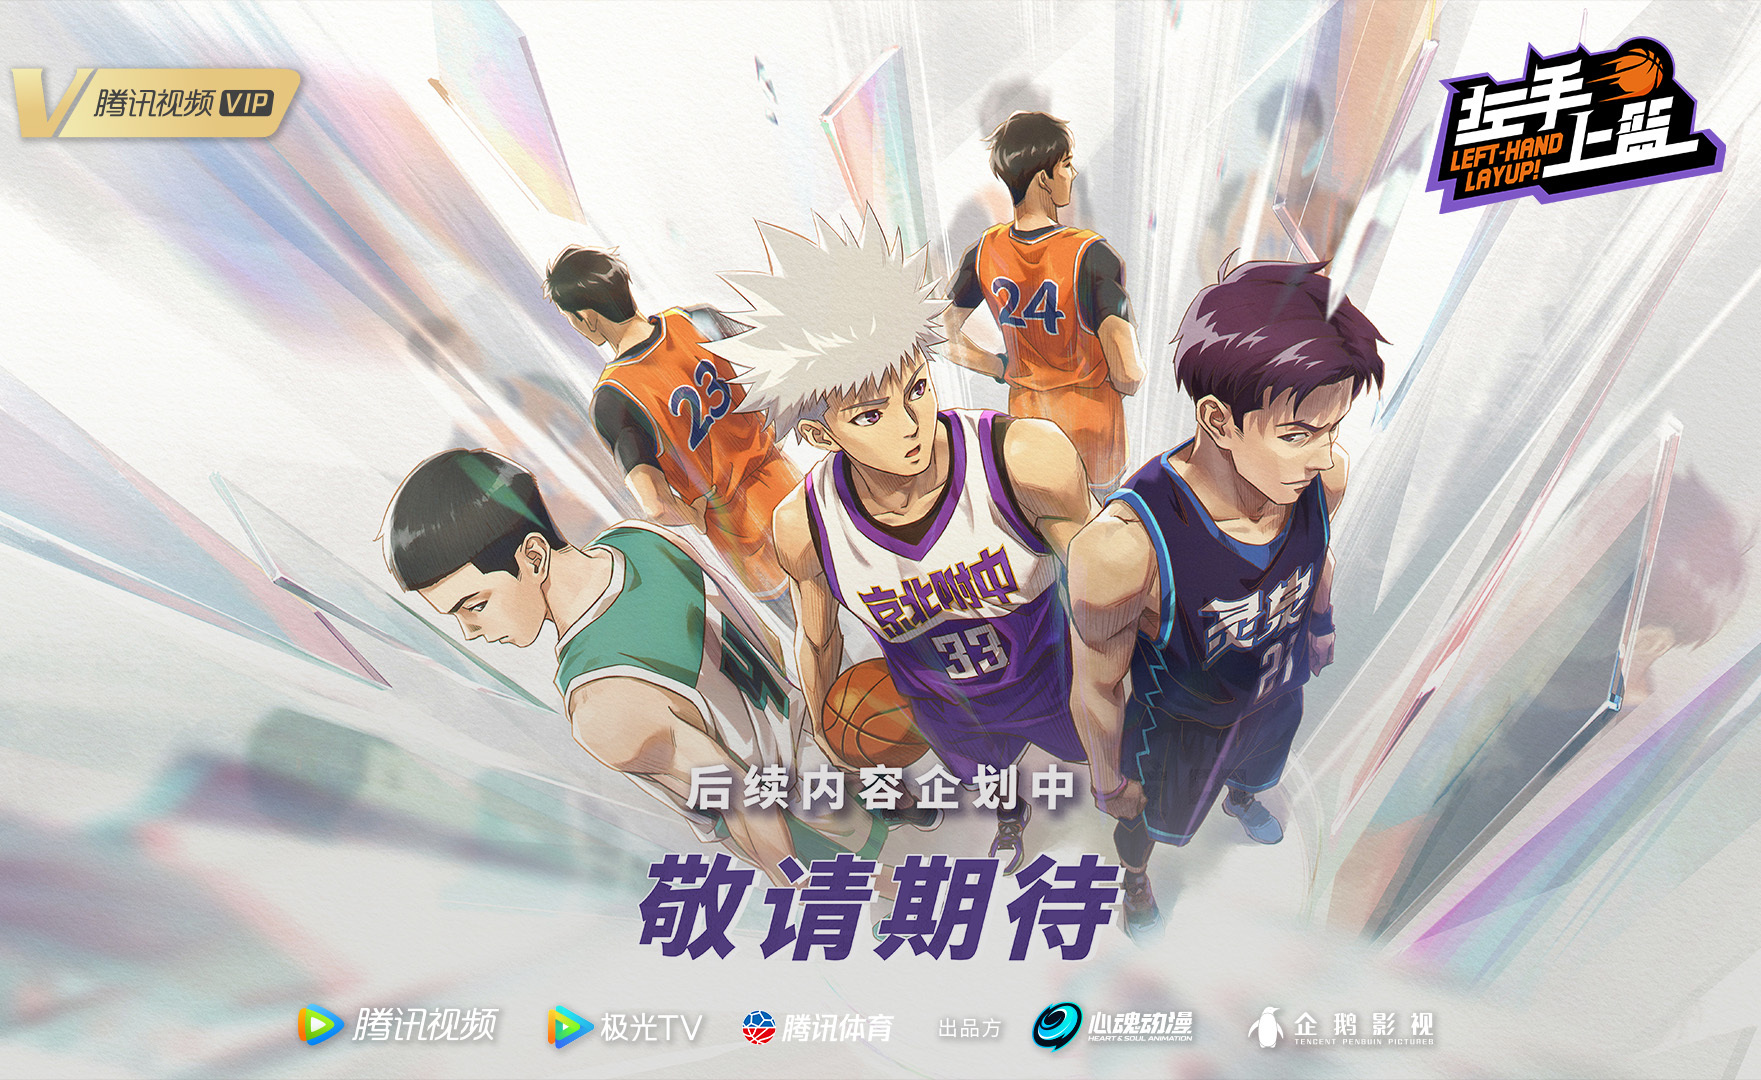 AnimeTV チェーン on X Visuals Chinese Anime LeftHand Layup Scheduled  for February in China Original High School Basketball Anime by Chinese  Animation Studio HEARTampSOUL More httpstcolcW7DTuENw  httpstco32CwSxY3aP  X